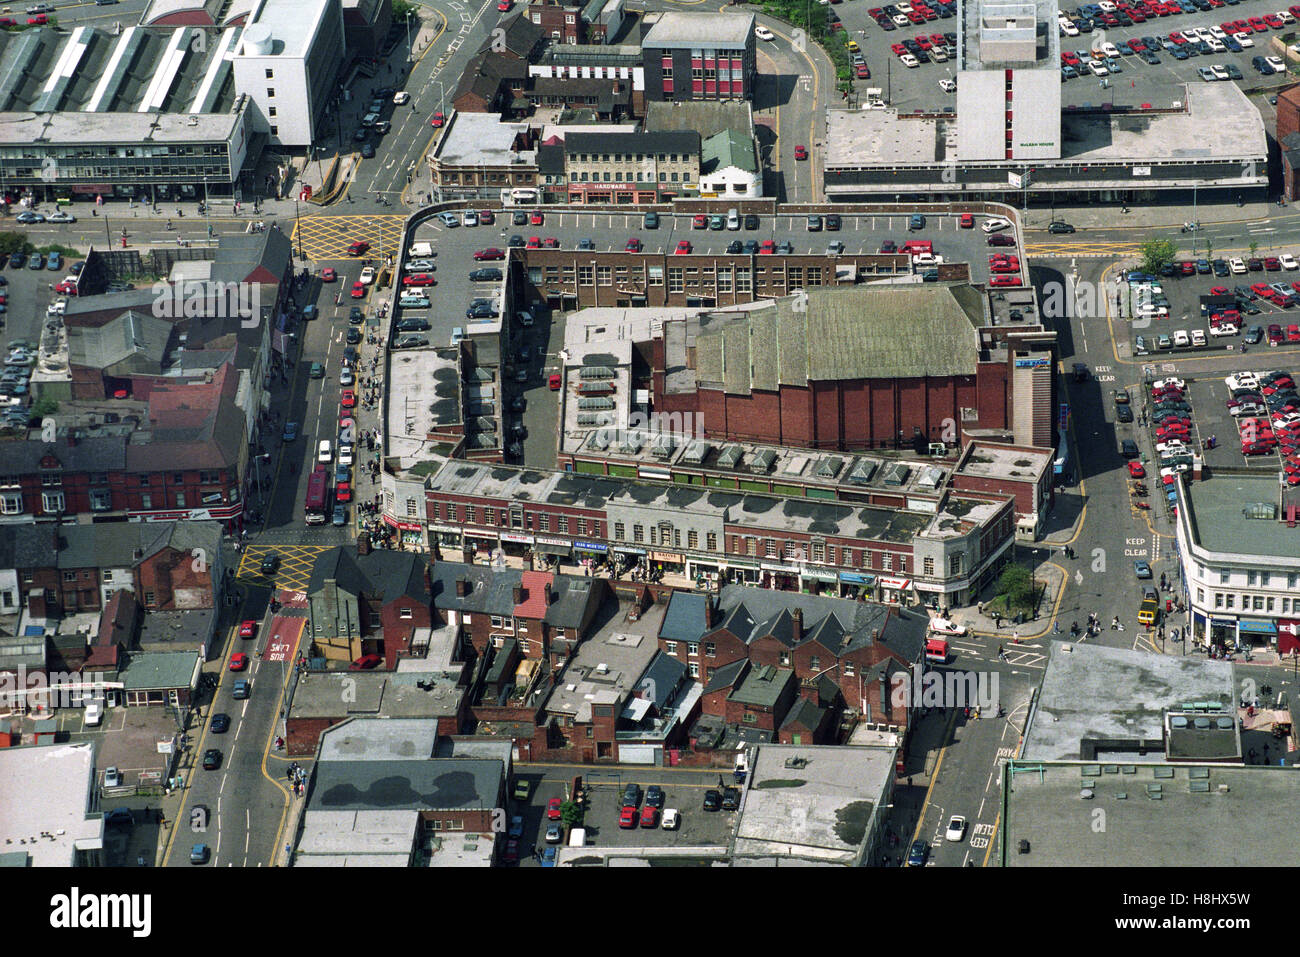 Aerial view of Wolverhampton showing Victoria St Skinner St School St Salop St 9/9/92 Stock Photo